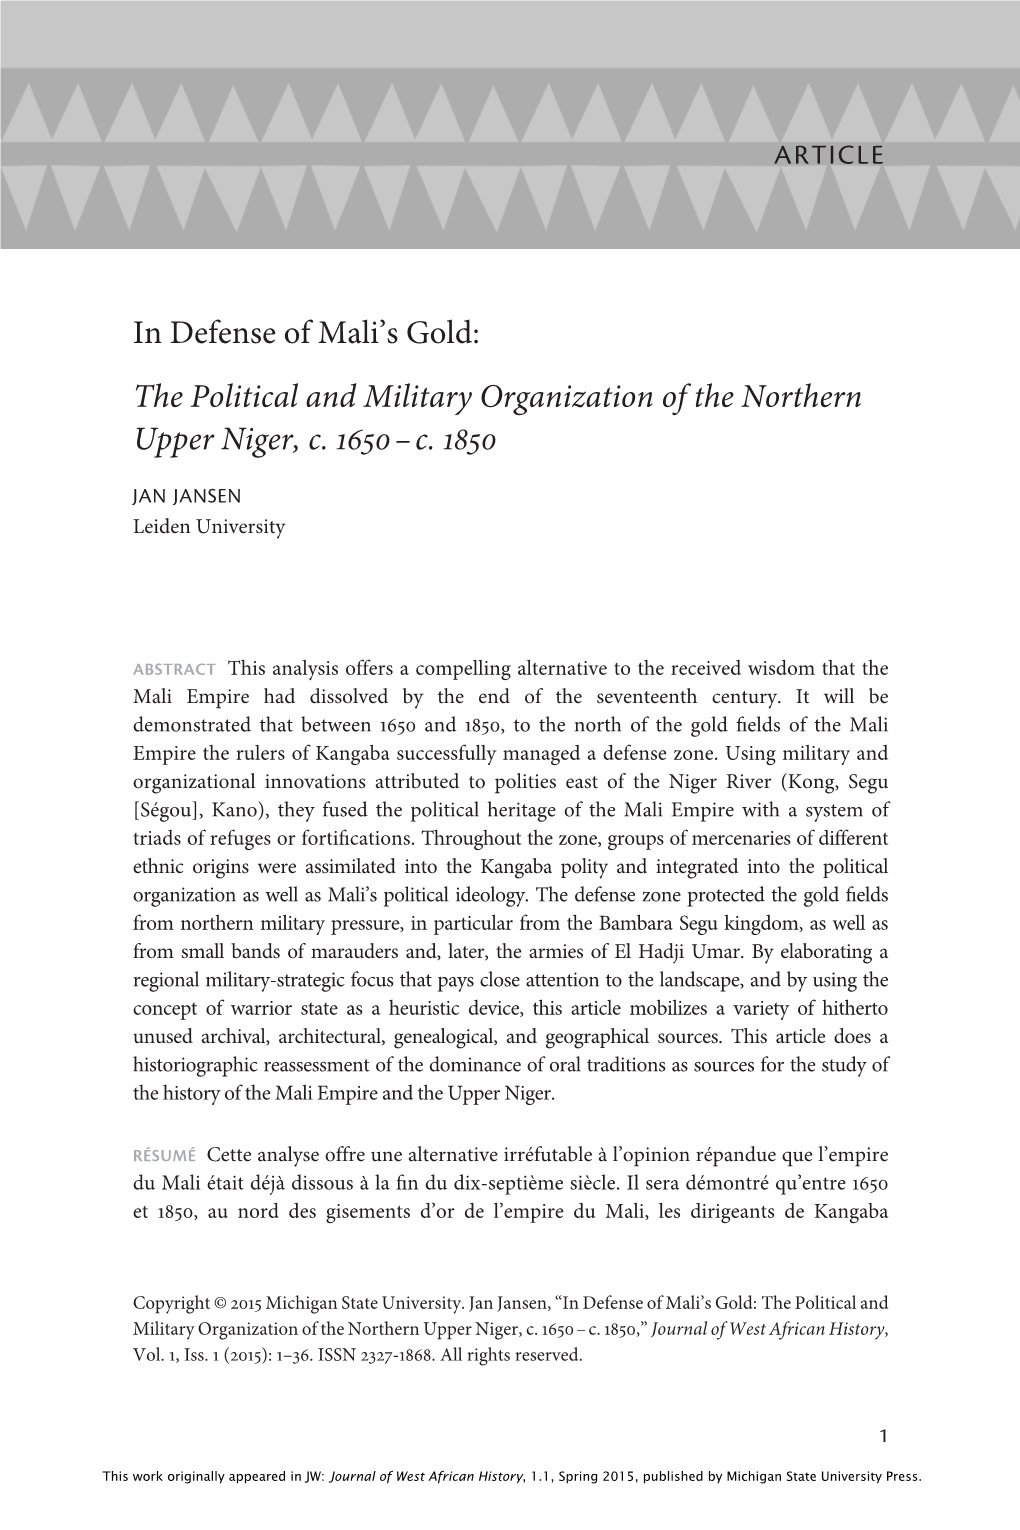 In Defense of Mali's Gold: the Political and Military Organization of The